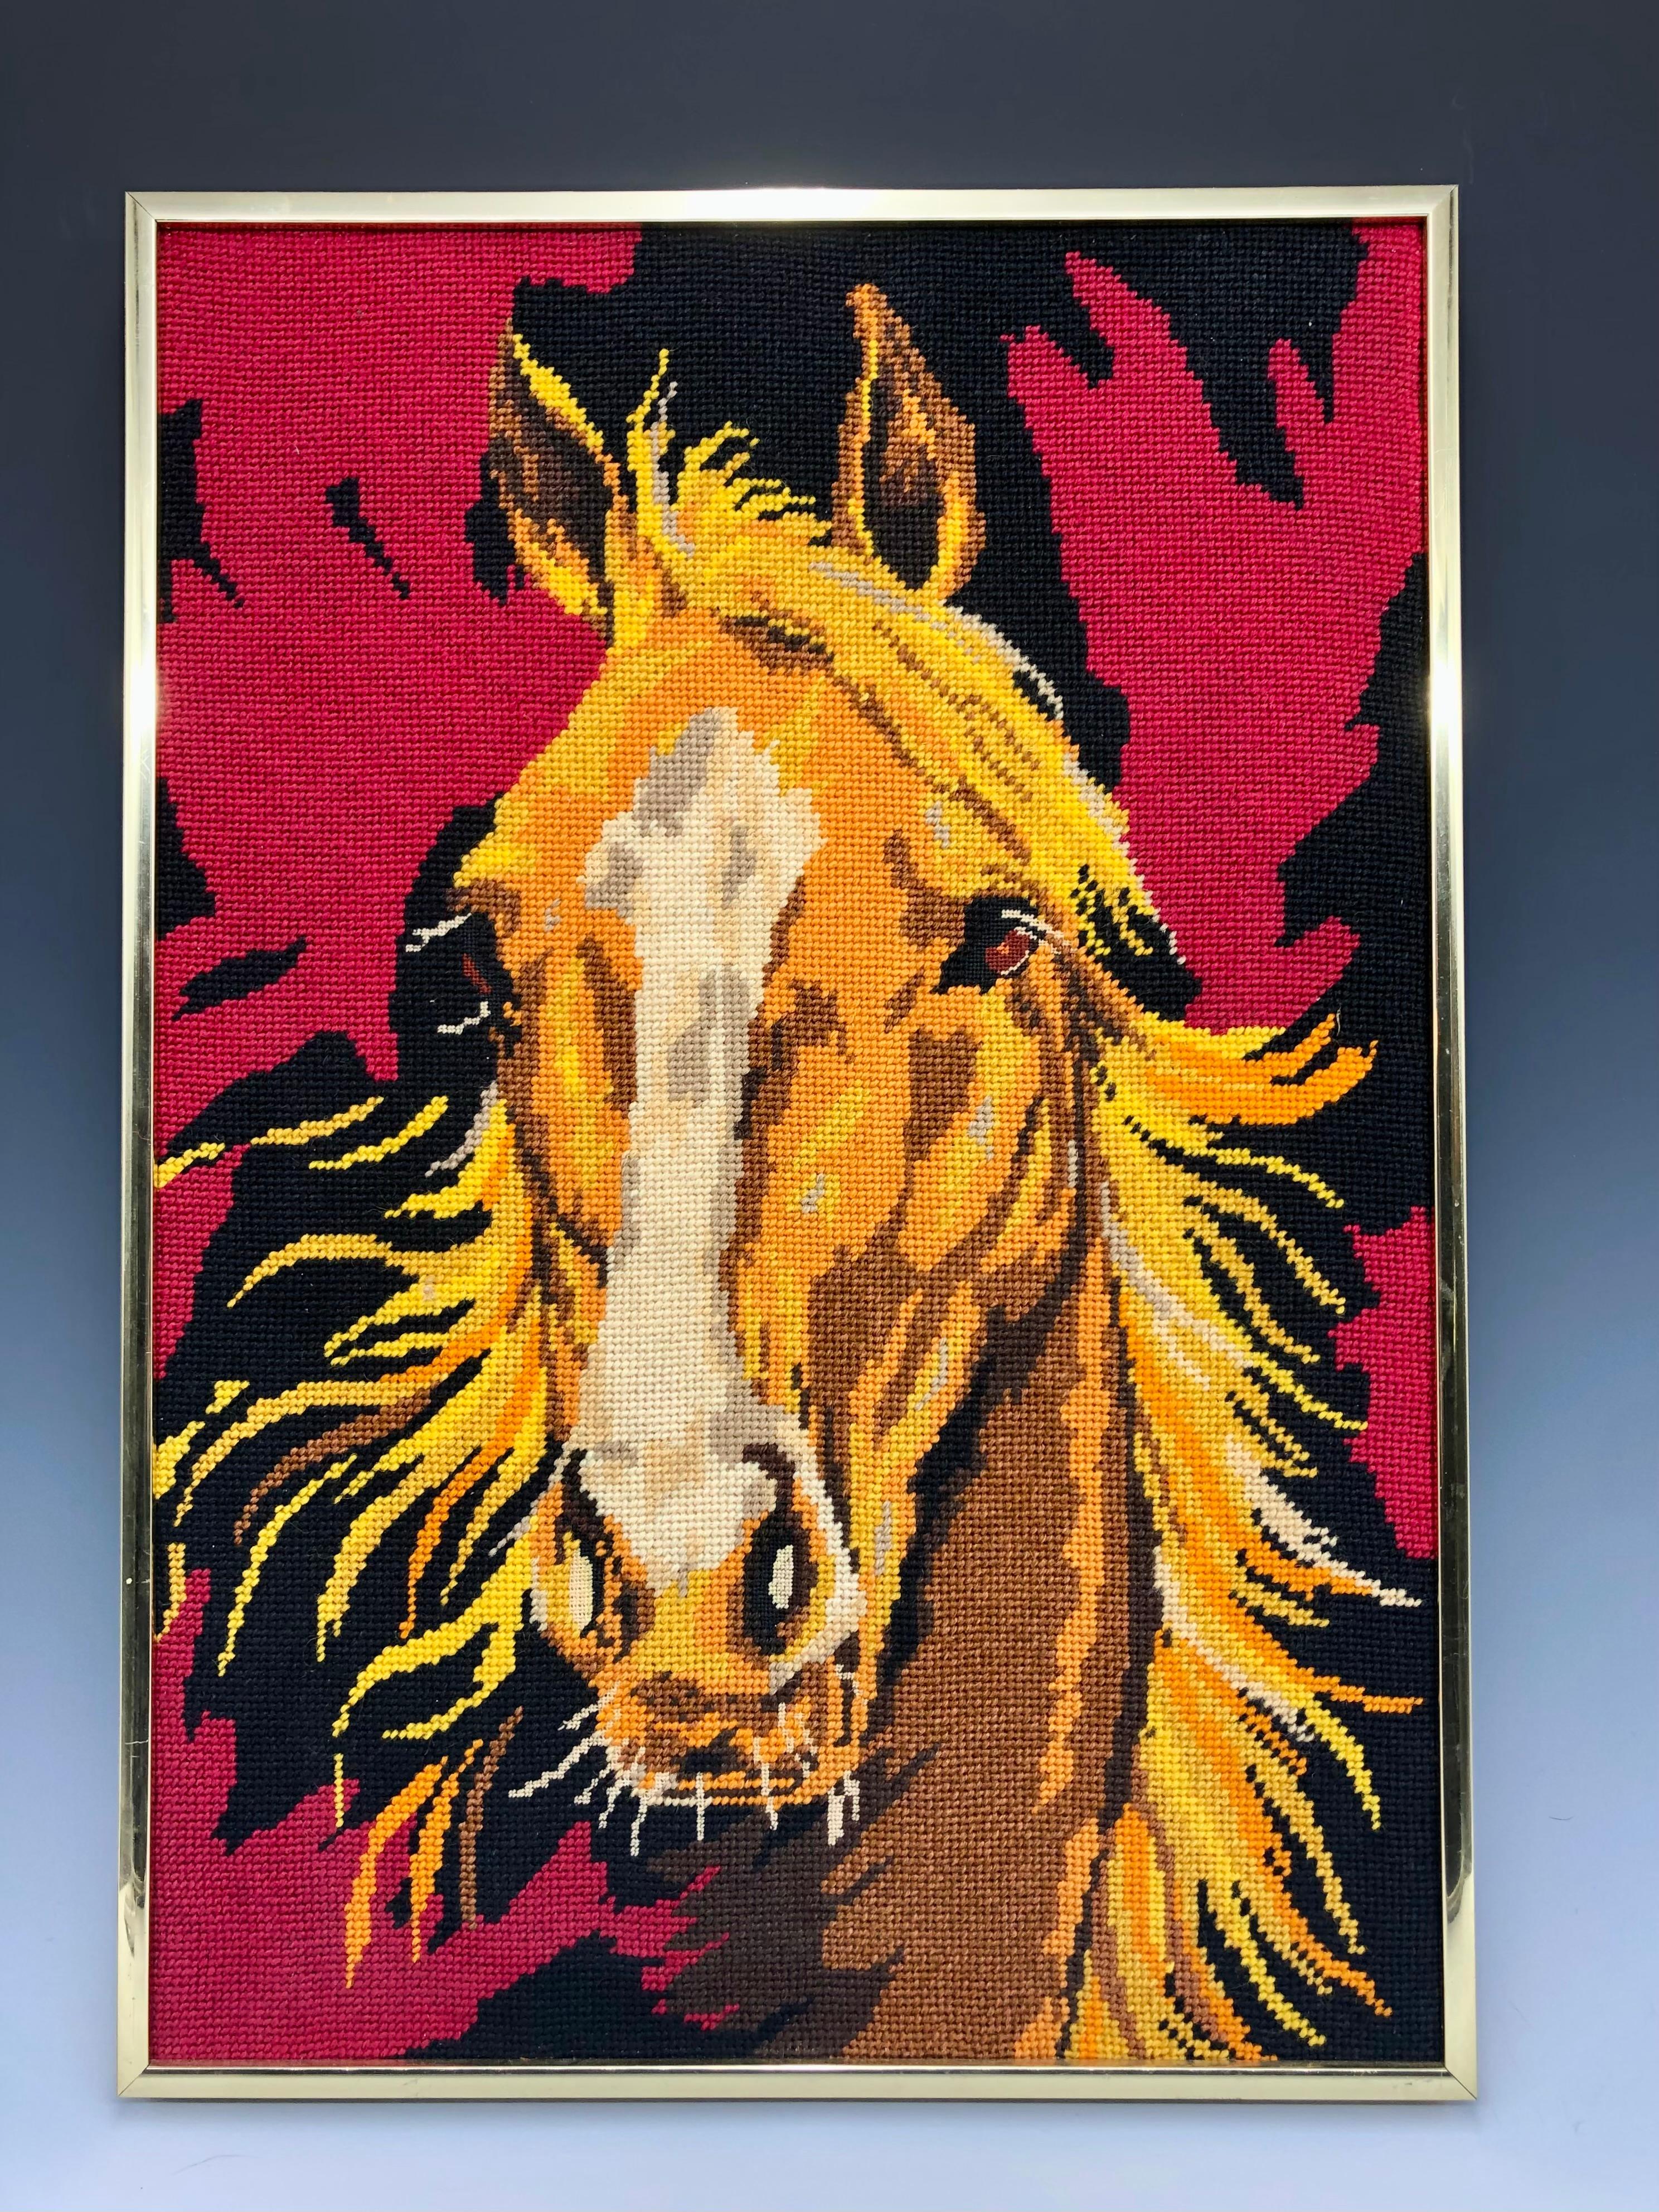 This striking 1970s hand-embroidered horse portrait has a red and black flame abstract background. 

The item is offered framed. The wool yarn colors are vivid and bright.

The embroidery is in great vintage condition, with no tears, holes, or